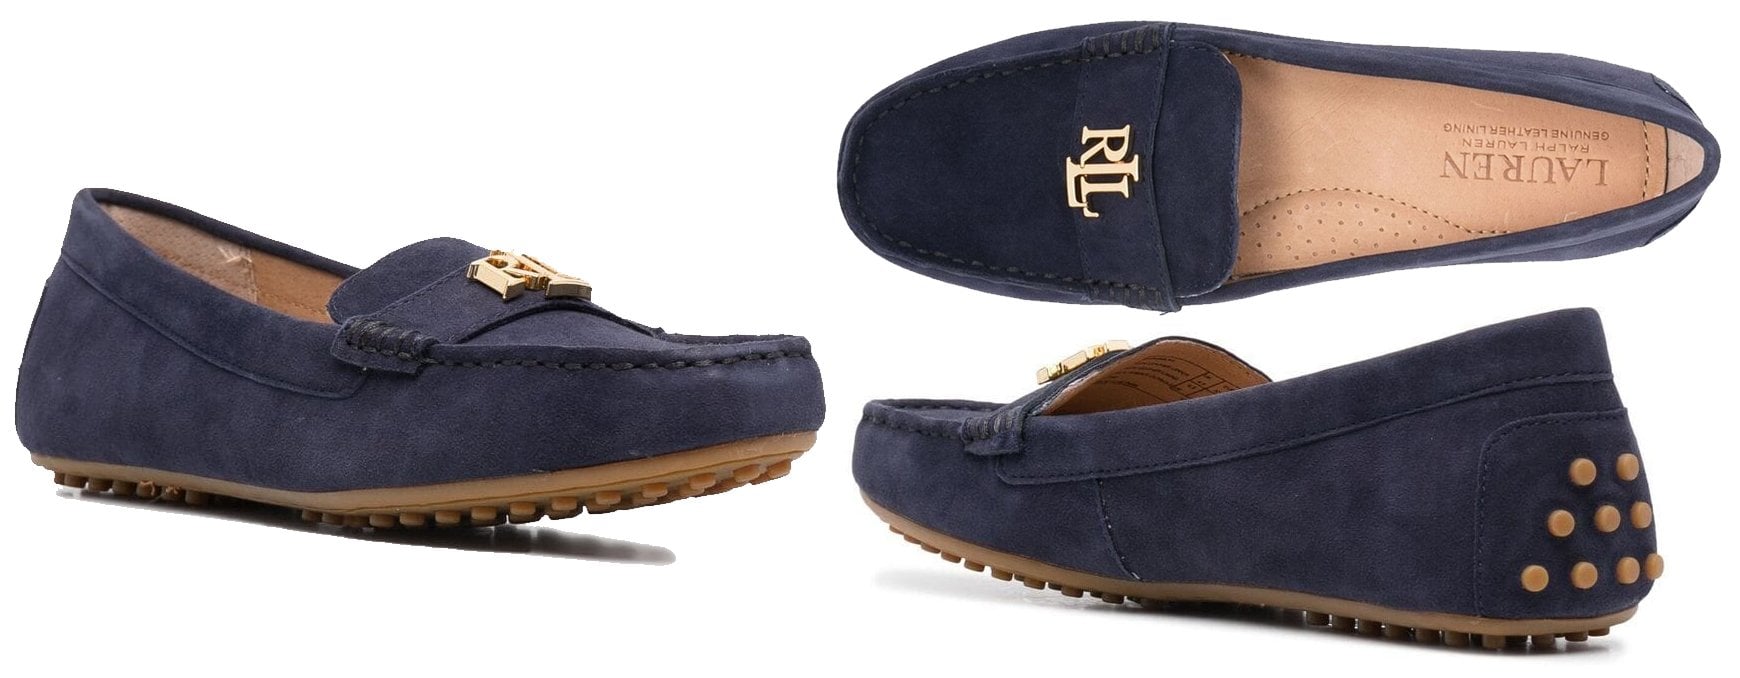 The Barnsbury features Lauren's signature logo lettering, finished with an exclusive rubber nub outsole